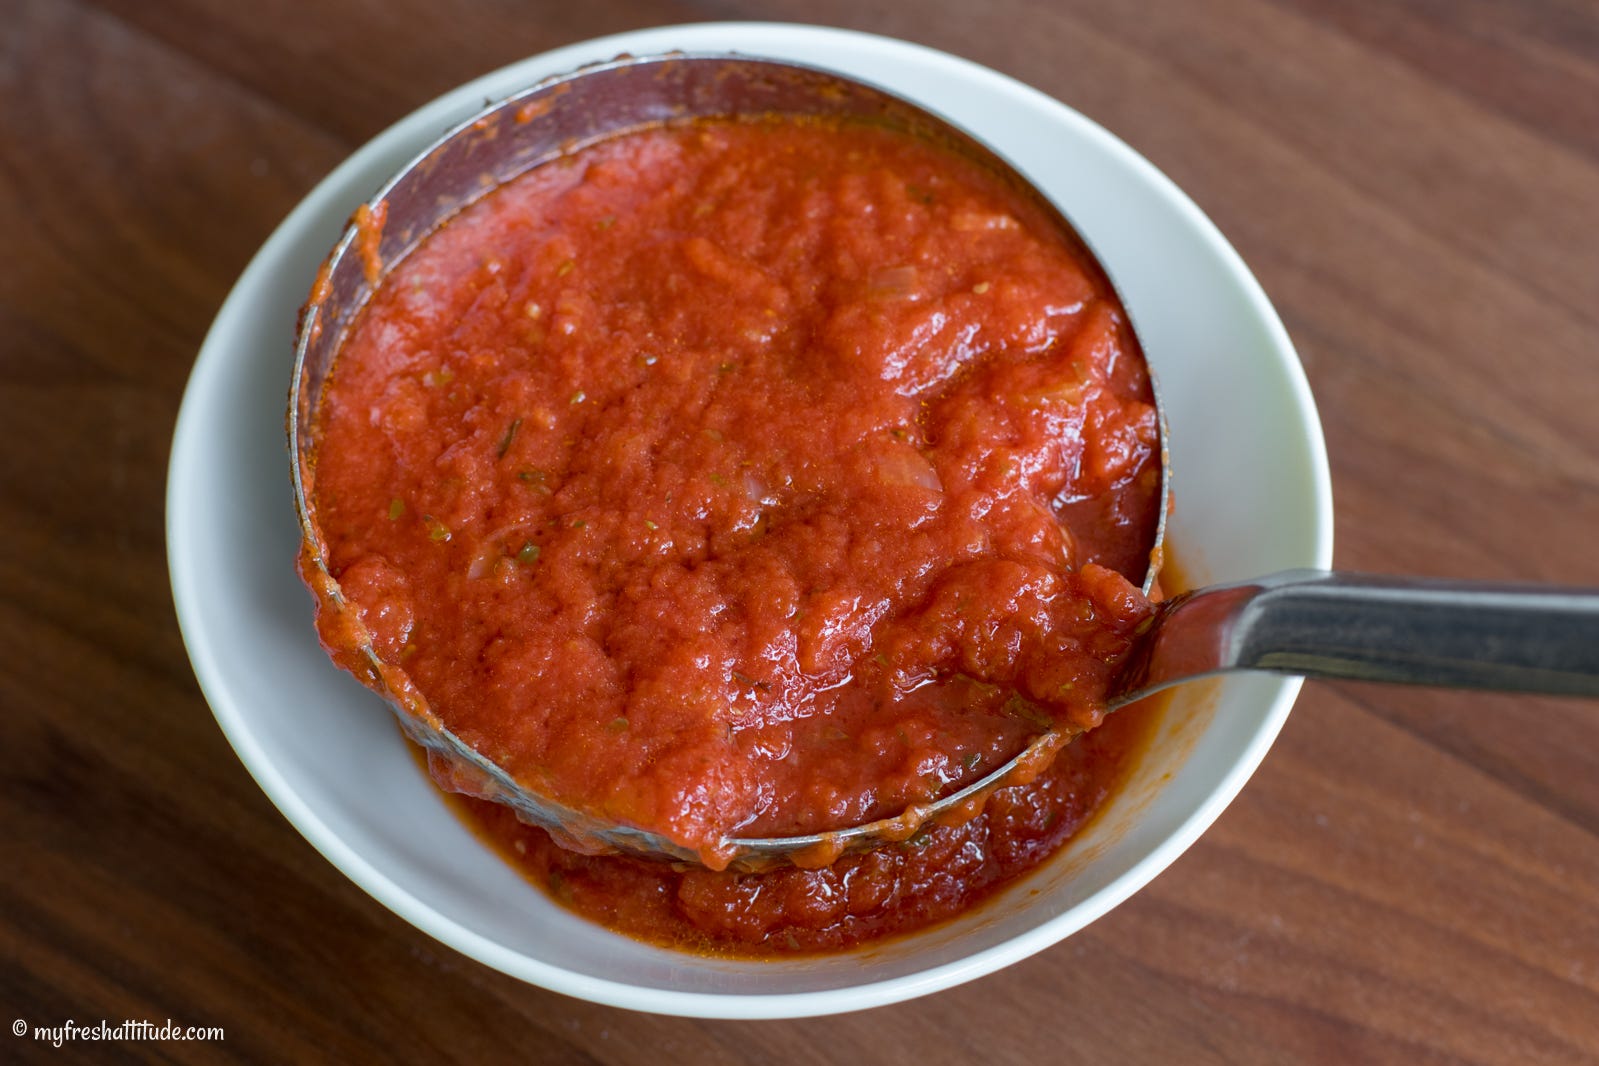 Pizza Sauce Vs. Marinara: What's the Difference?